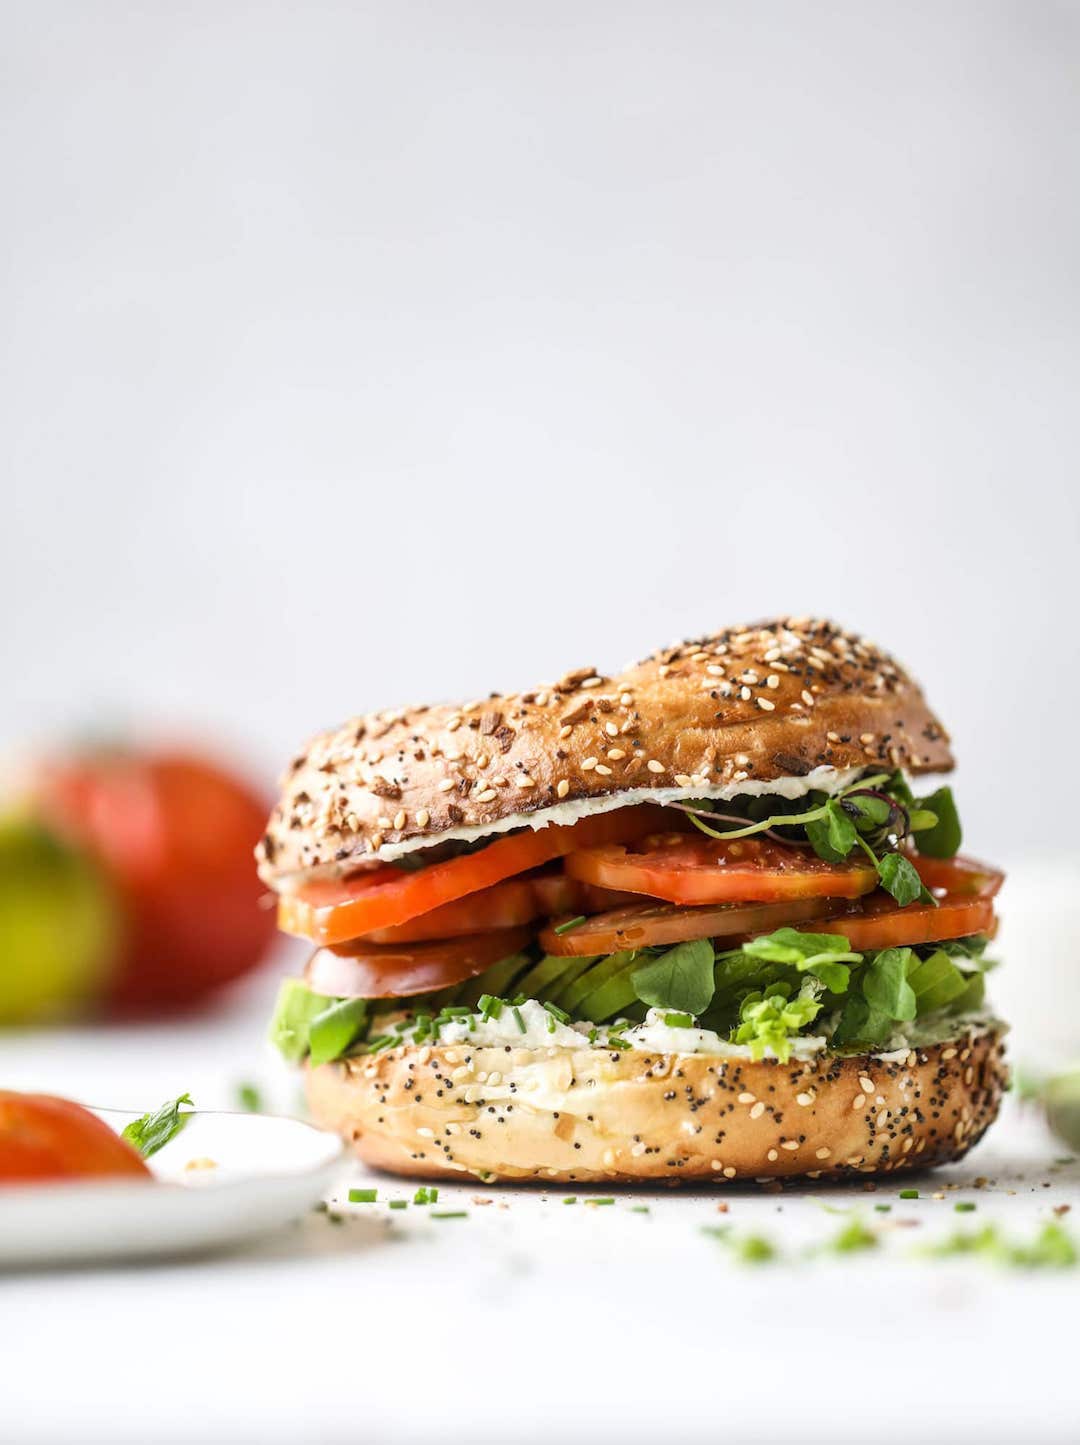 11 Yummy Plant Based Sandwiches - Bagelwhiches by How Sweet Eats